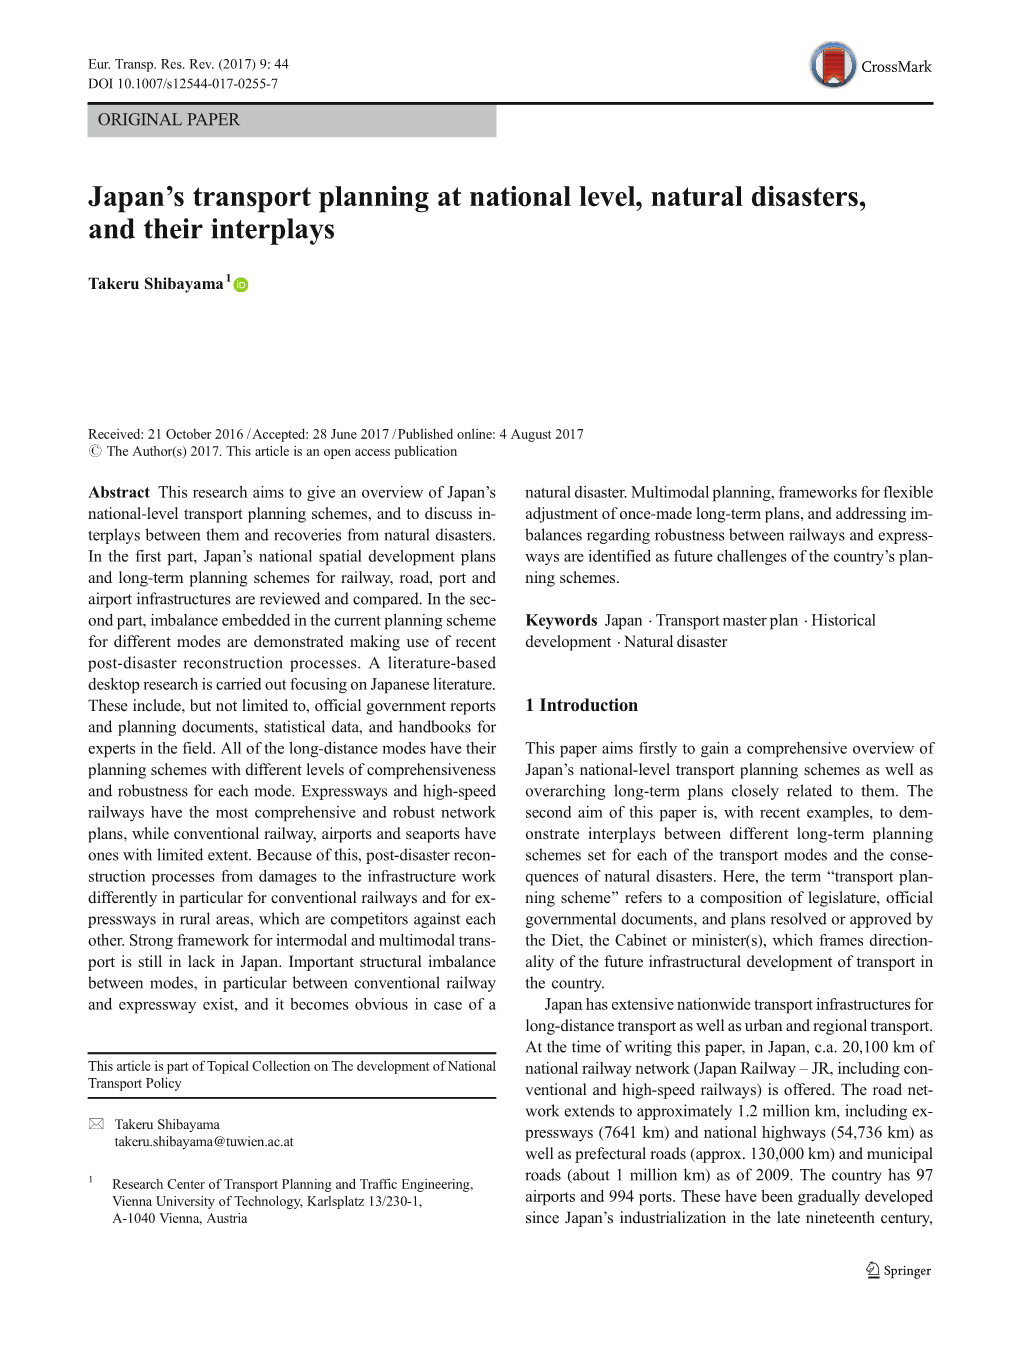 Japan's Transport Planning at National Level, Natural Disasters, and Their